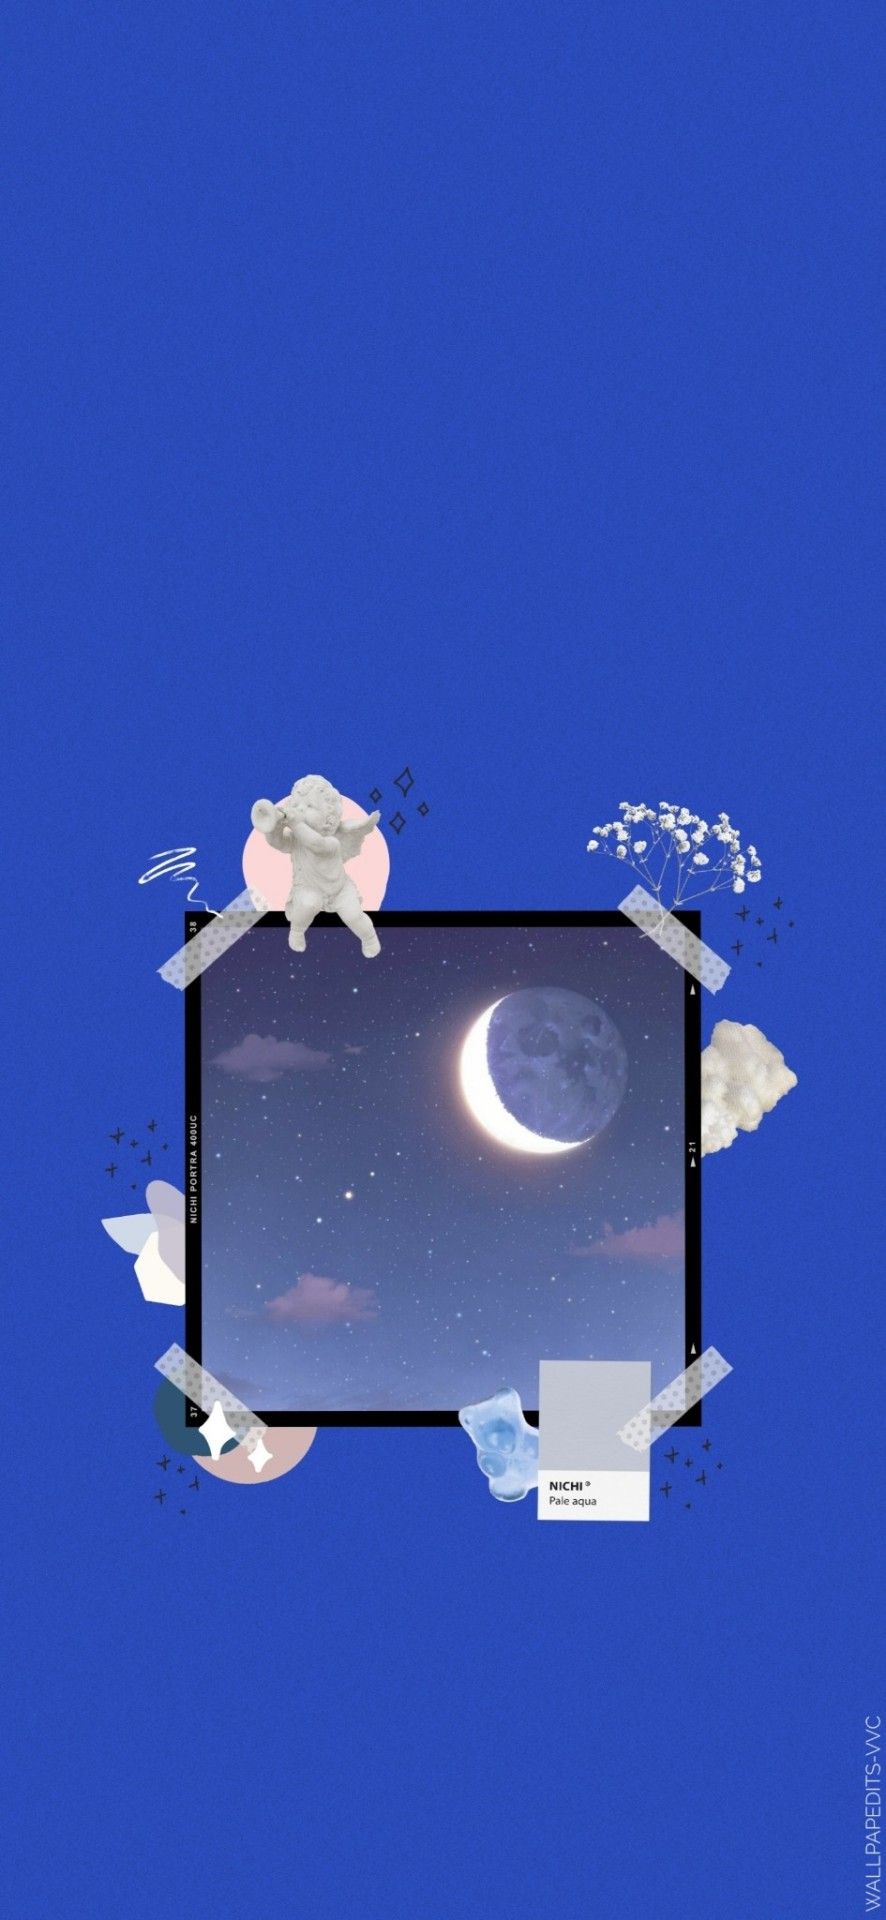 Aesthetic phone wallpaper with a blue background and a square containing a crescent moon - Blue, moon